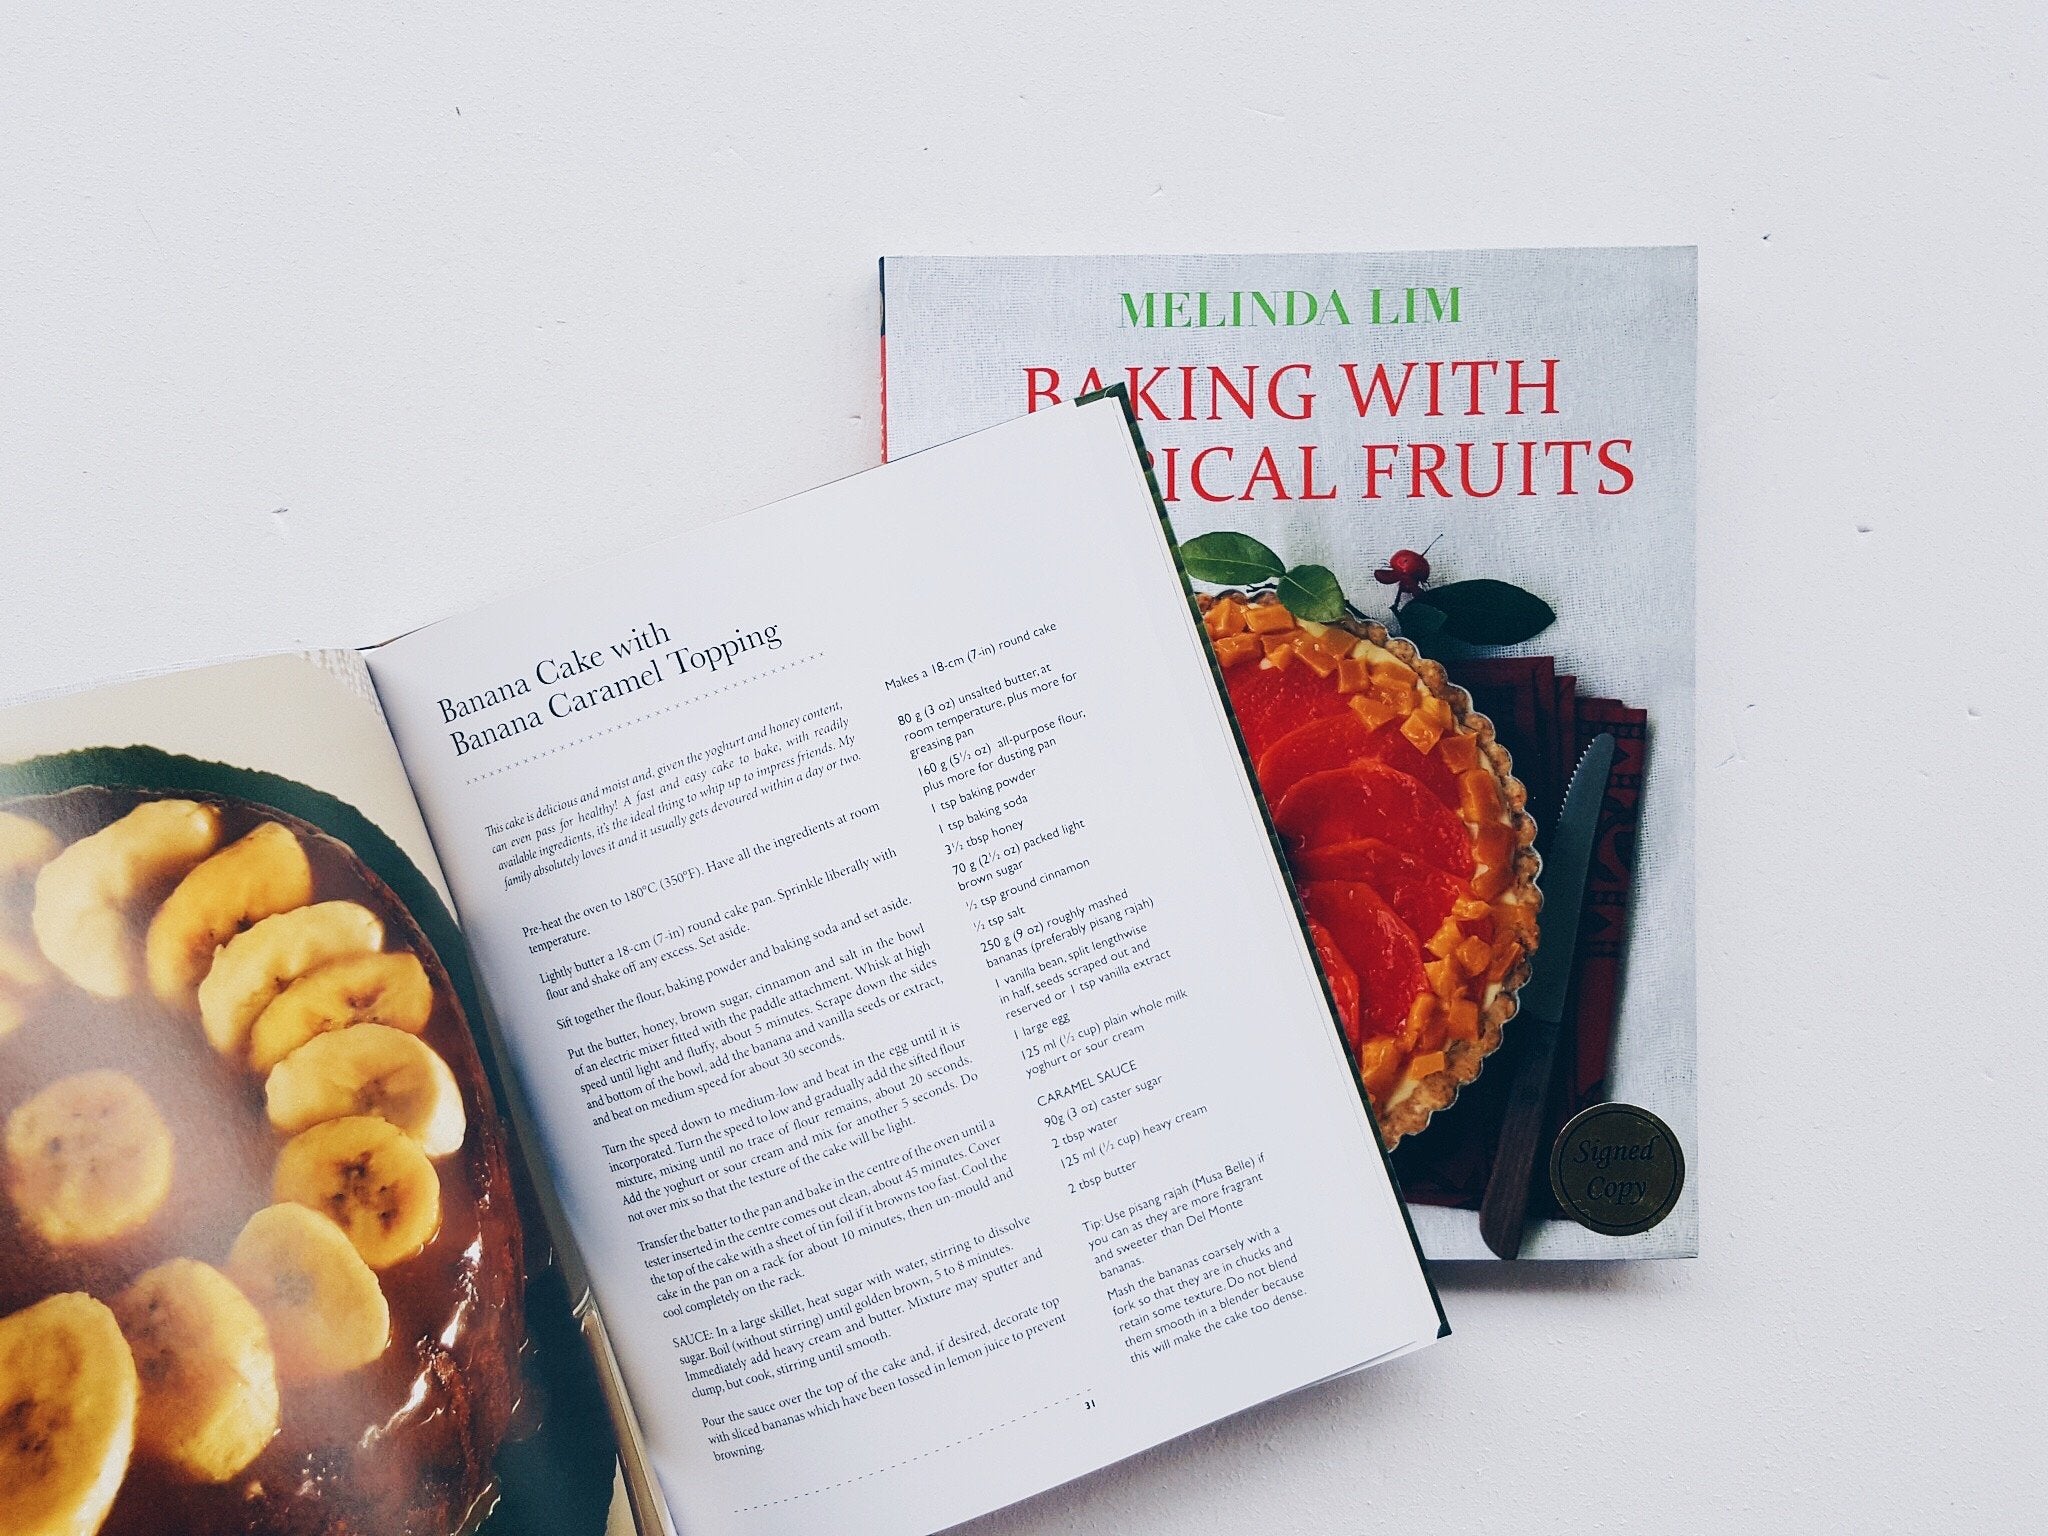 Baking with Tropical Fruits